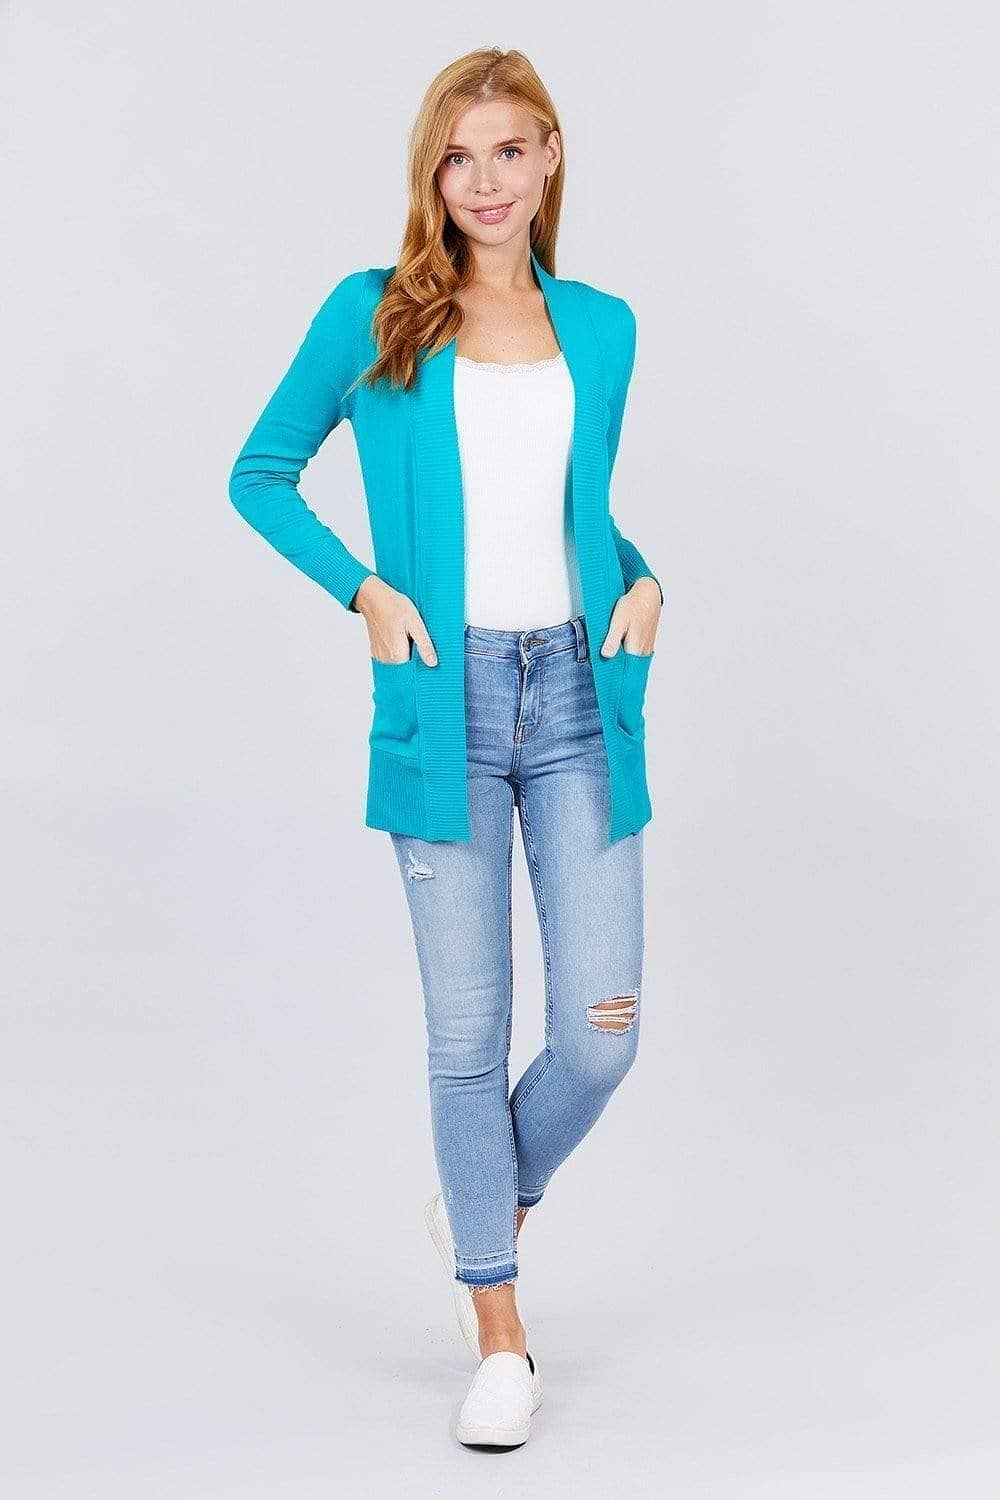 Turquoise Long Sleeve Open-Front Rib Knit Cardigan - Shopping Therapy M Cardigan